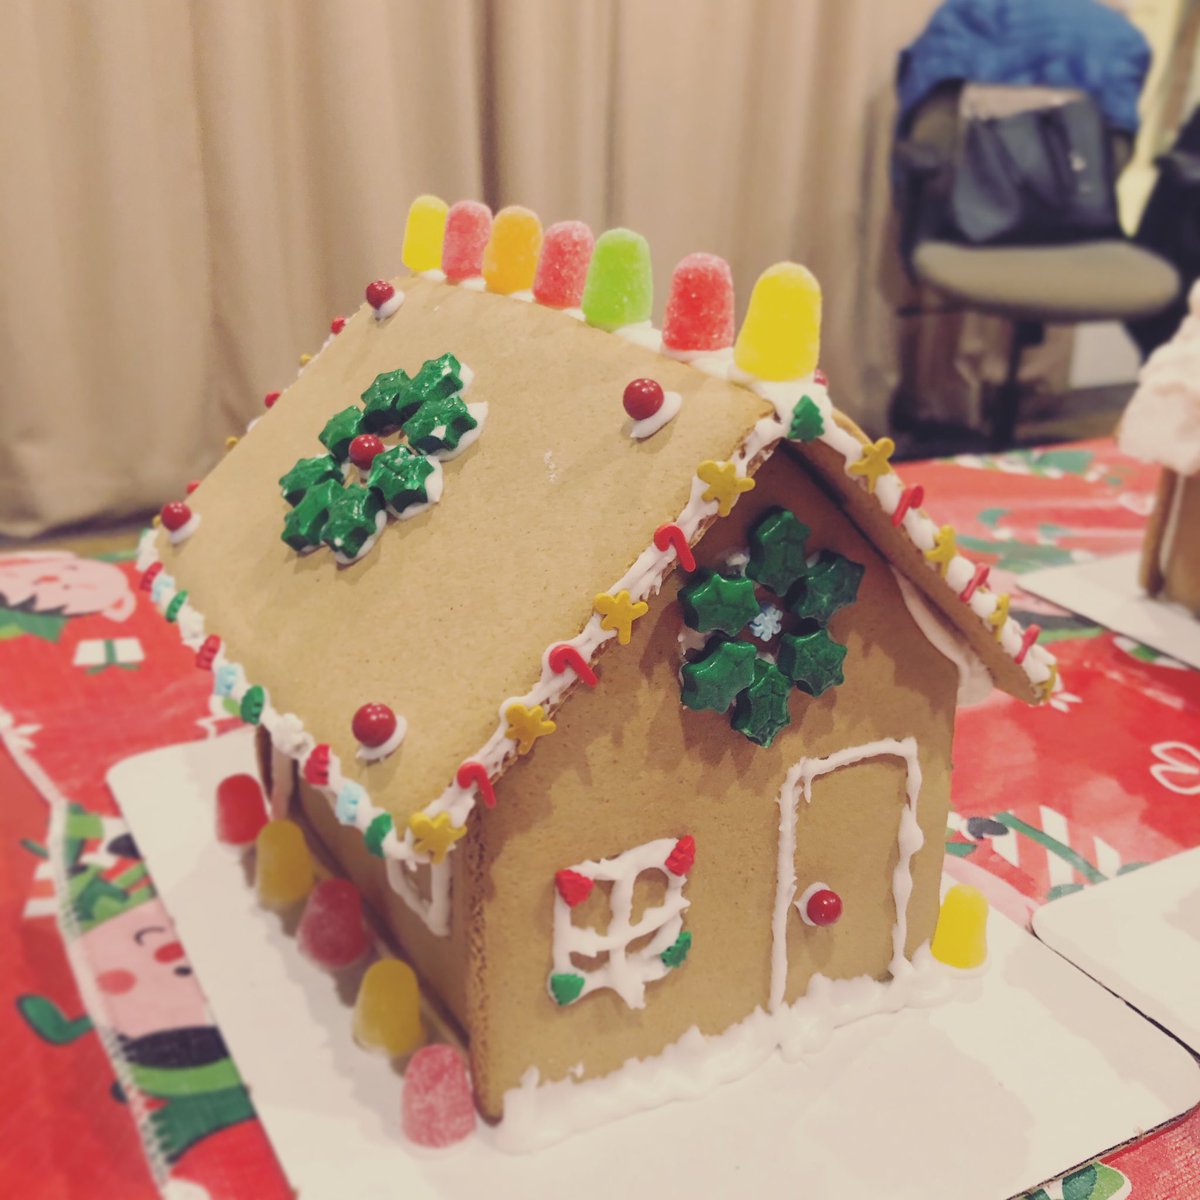 This was way more stressful then it should have been! 🎄🎄
•
•
•
#gingerbreadhouse #christmas #decorating #gingerbreadhousemaking